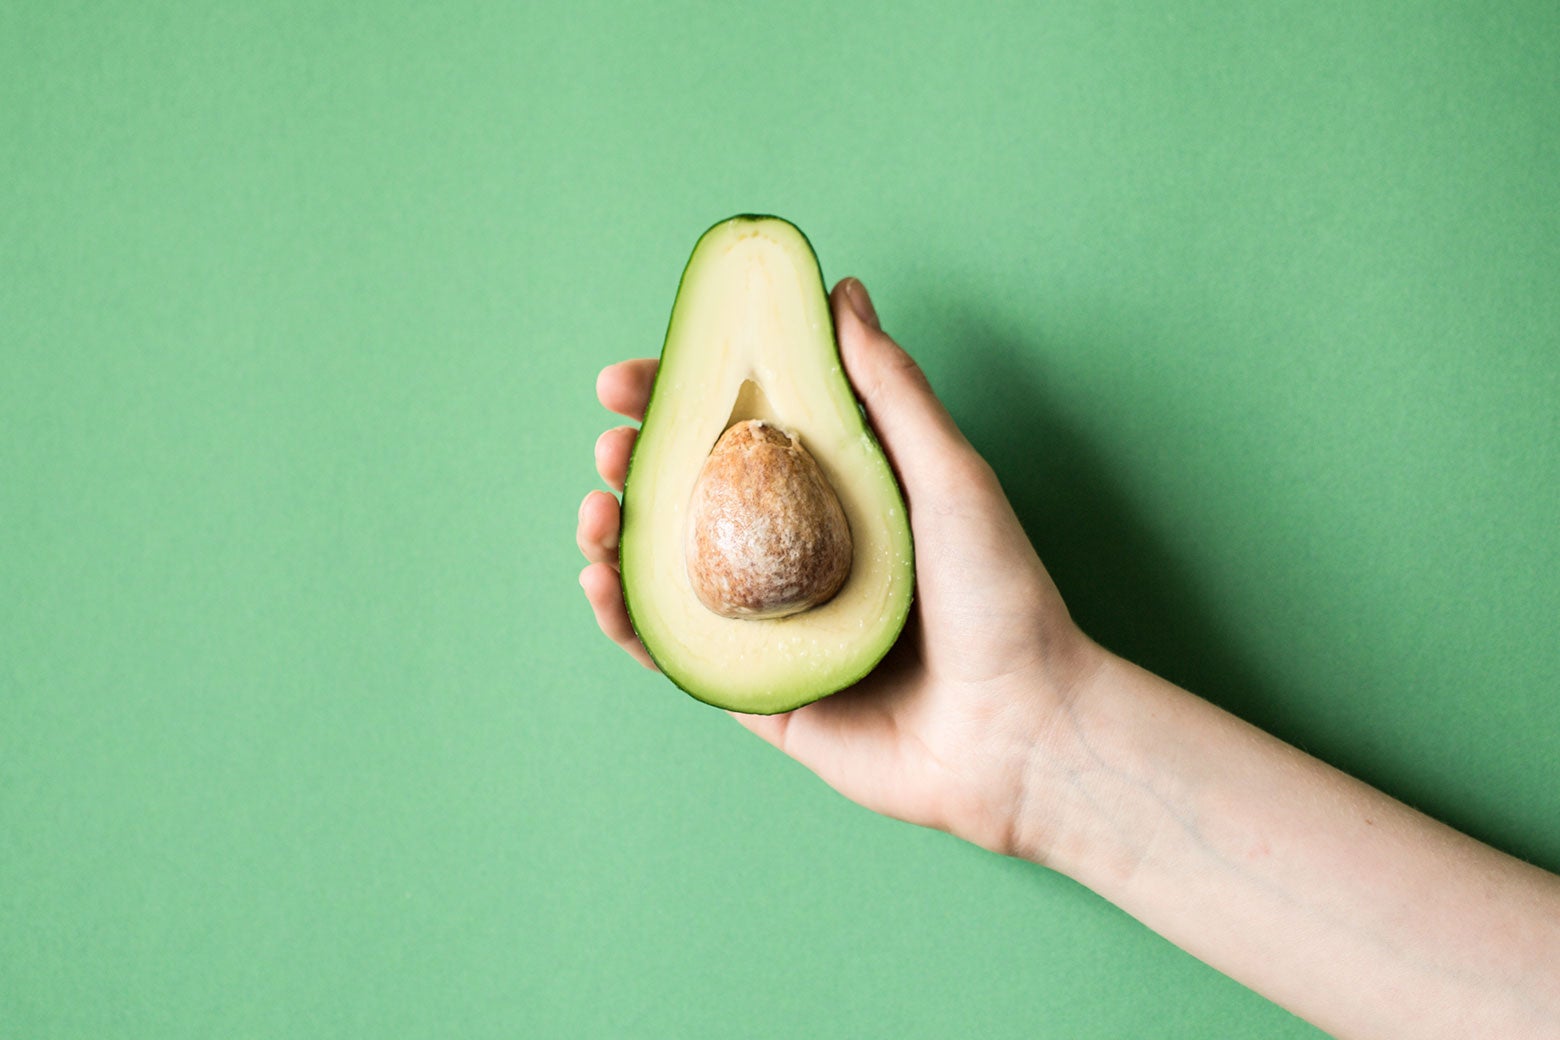 A hand holds up a perfectly ripe sliced avocado against an avocado-green background.